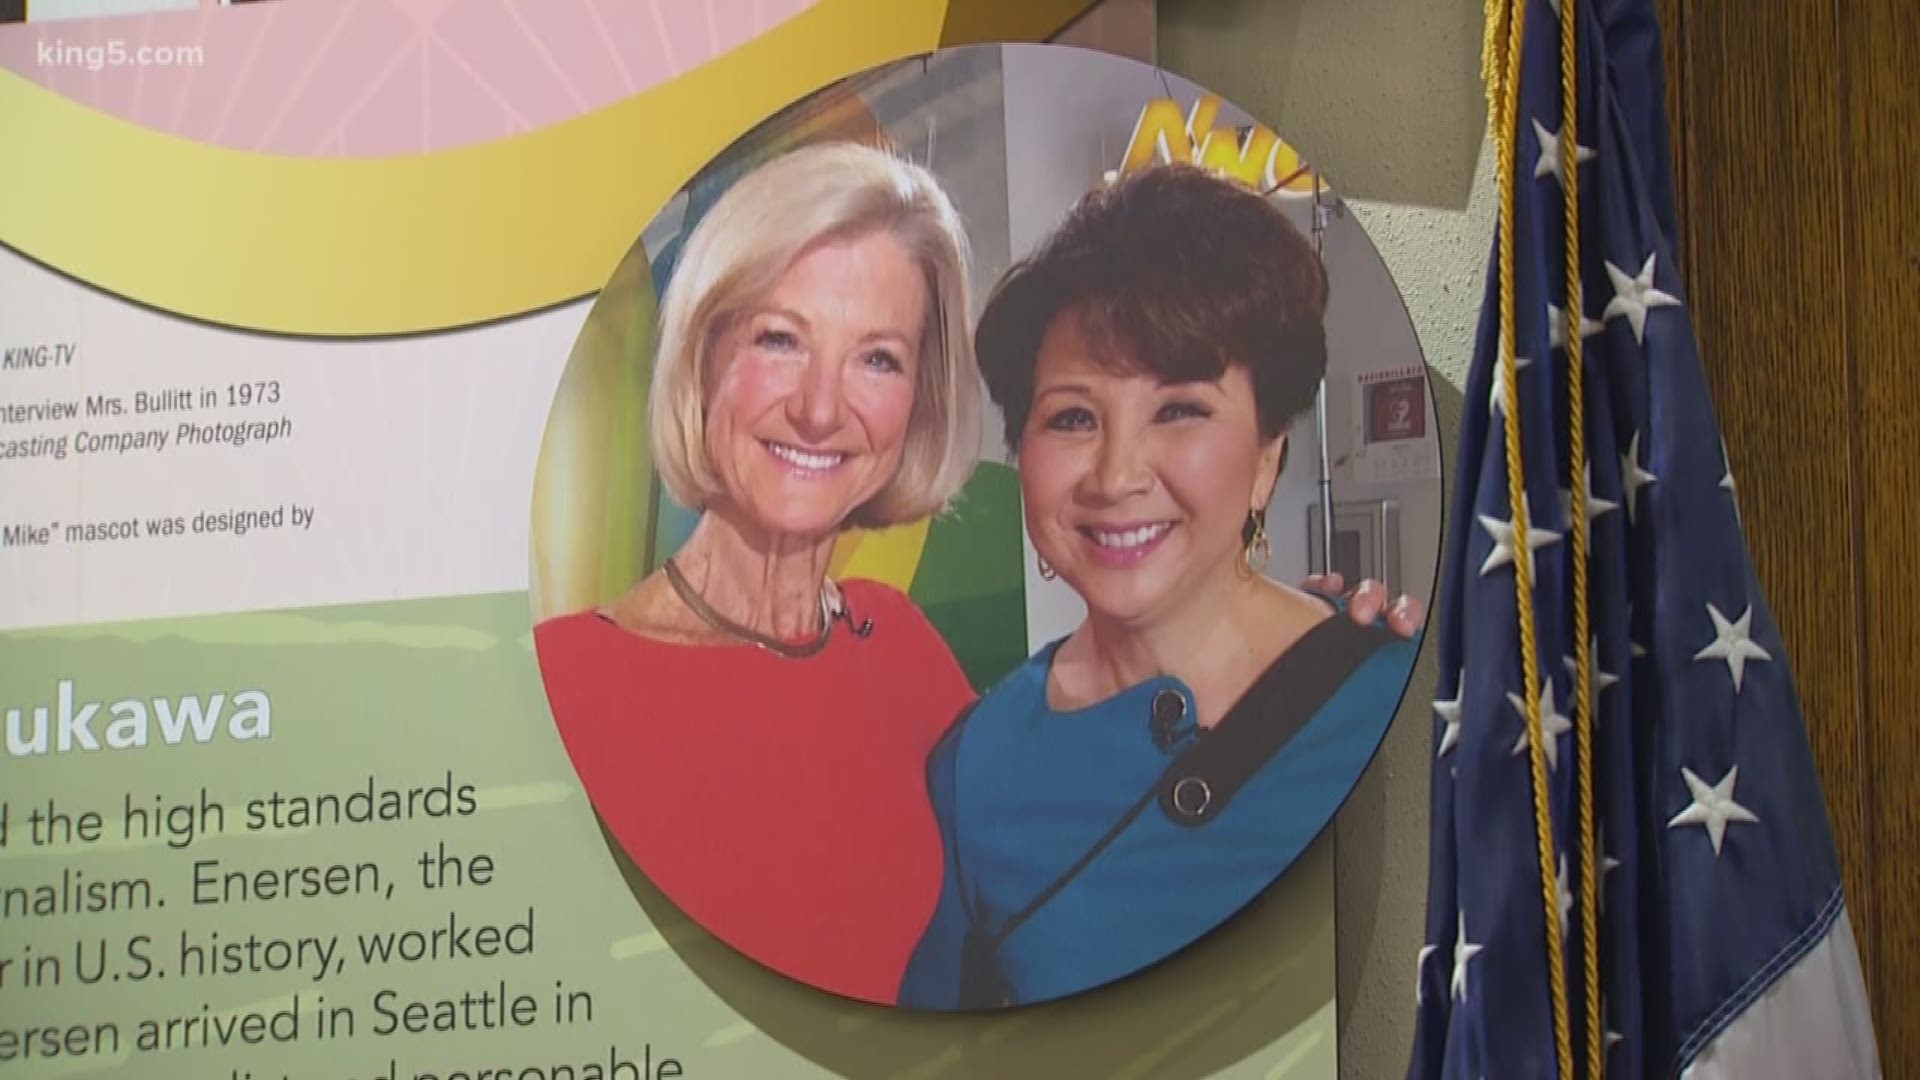 Former KING 5 employees were among those honored at the "Ahead of the Curve" exhibit.